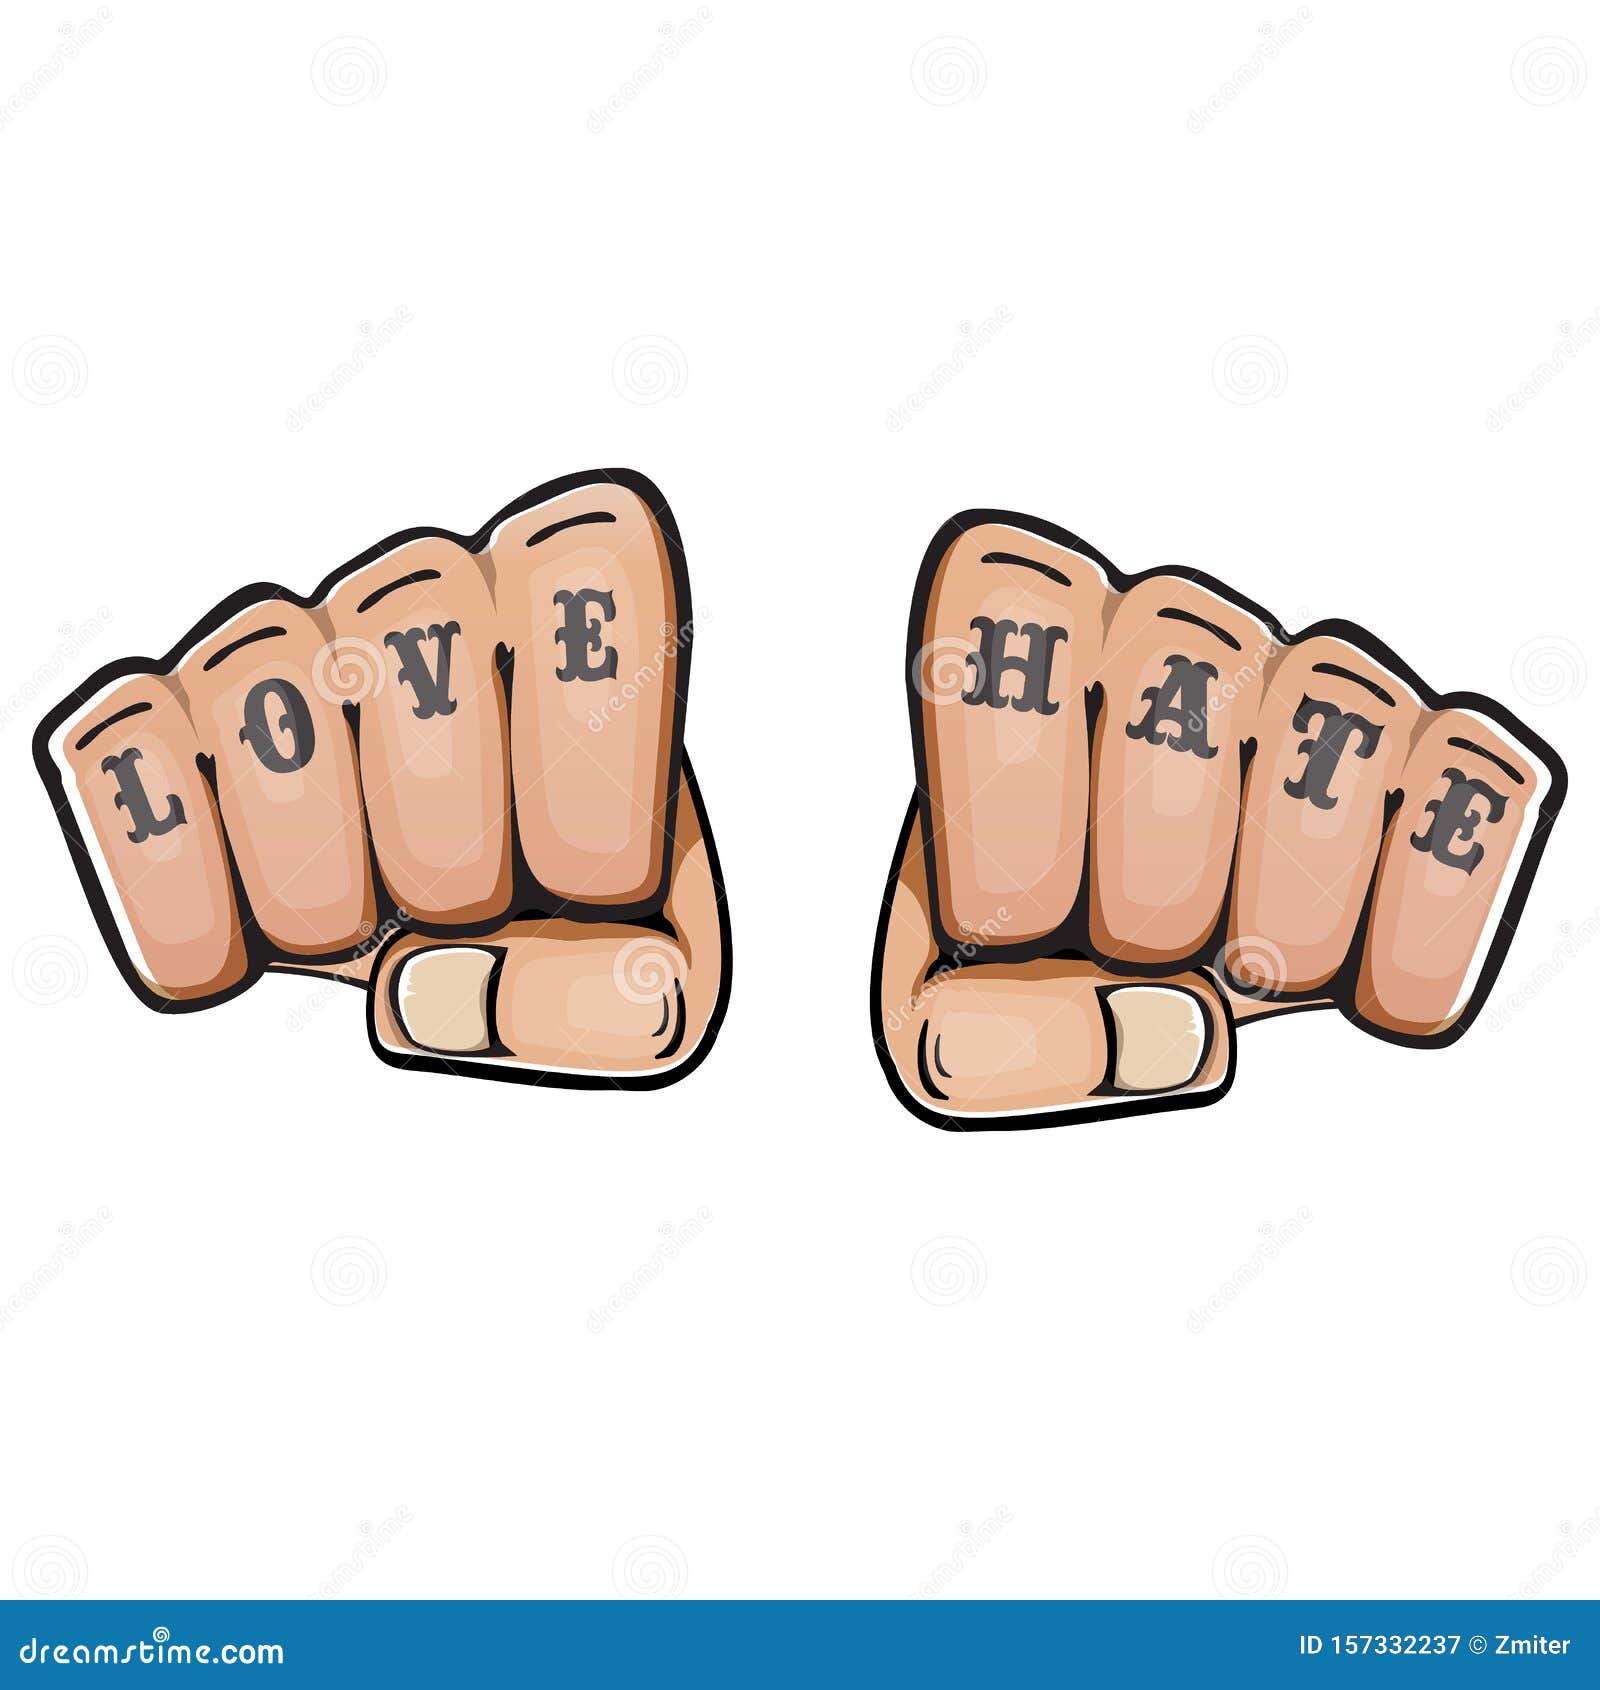 Love And Hate Fists With Tattoo Isolated On White Background Fight For Love Concept Illustration With Fist Punch Stock Vector Illustration Of Prin Anger